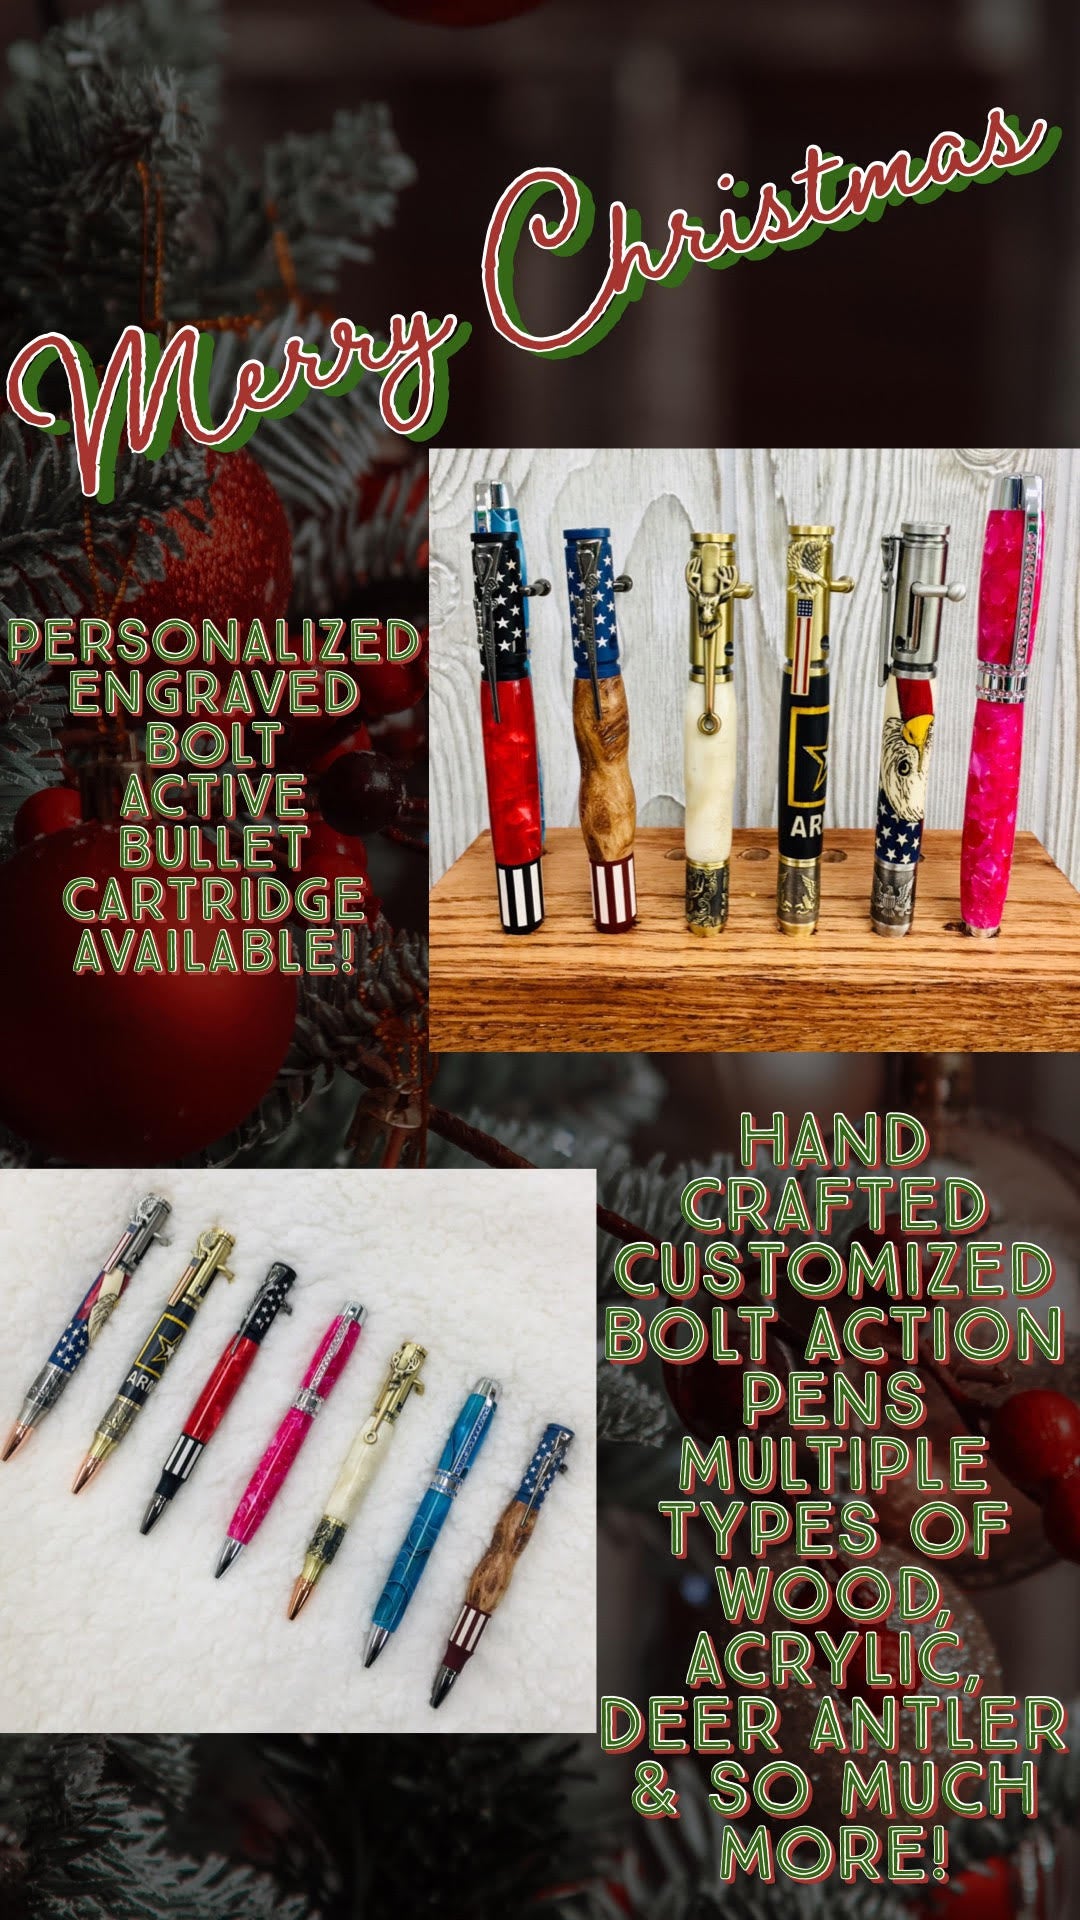 Hand Crafted Bolt Action Pens